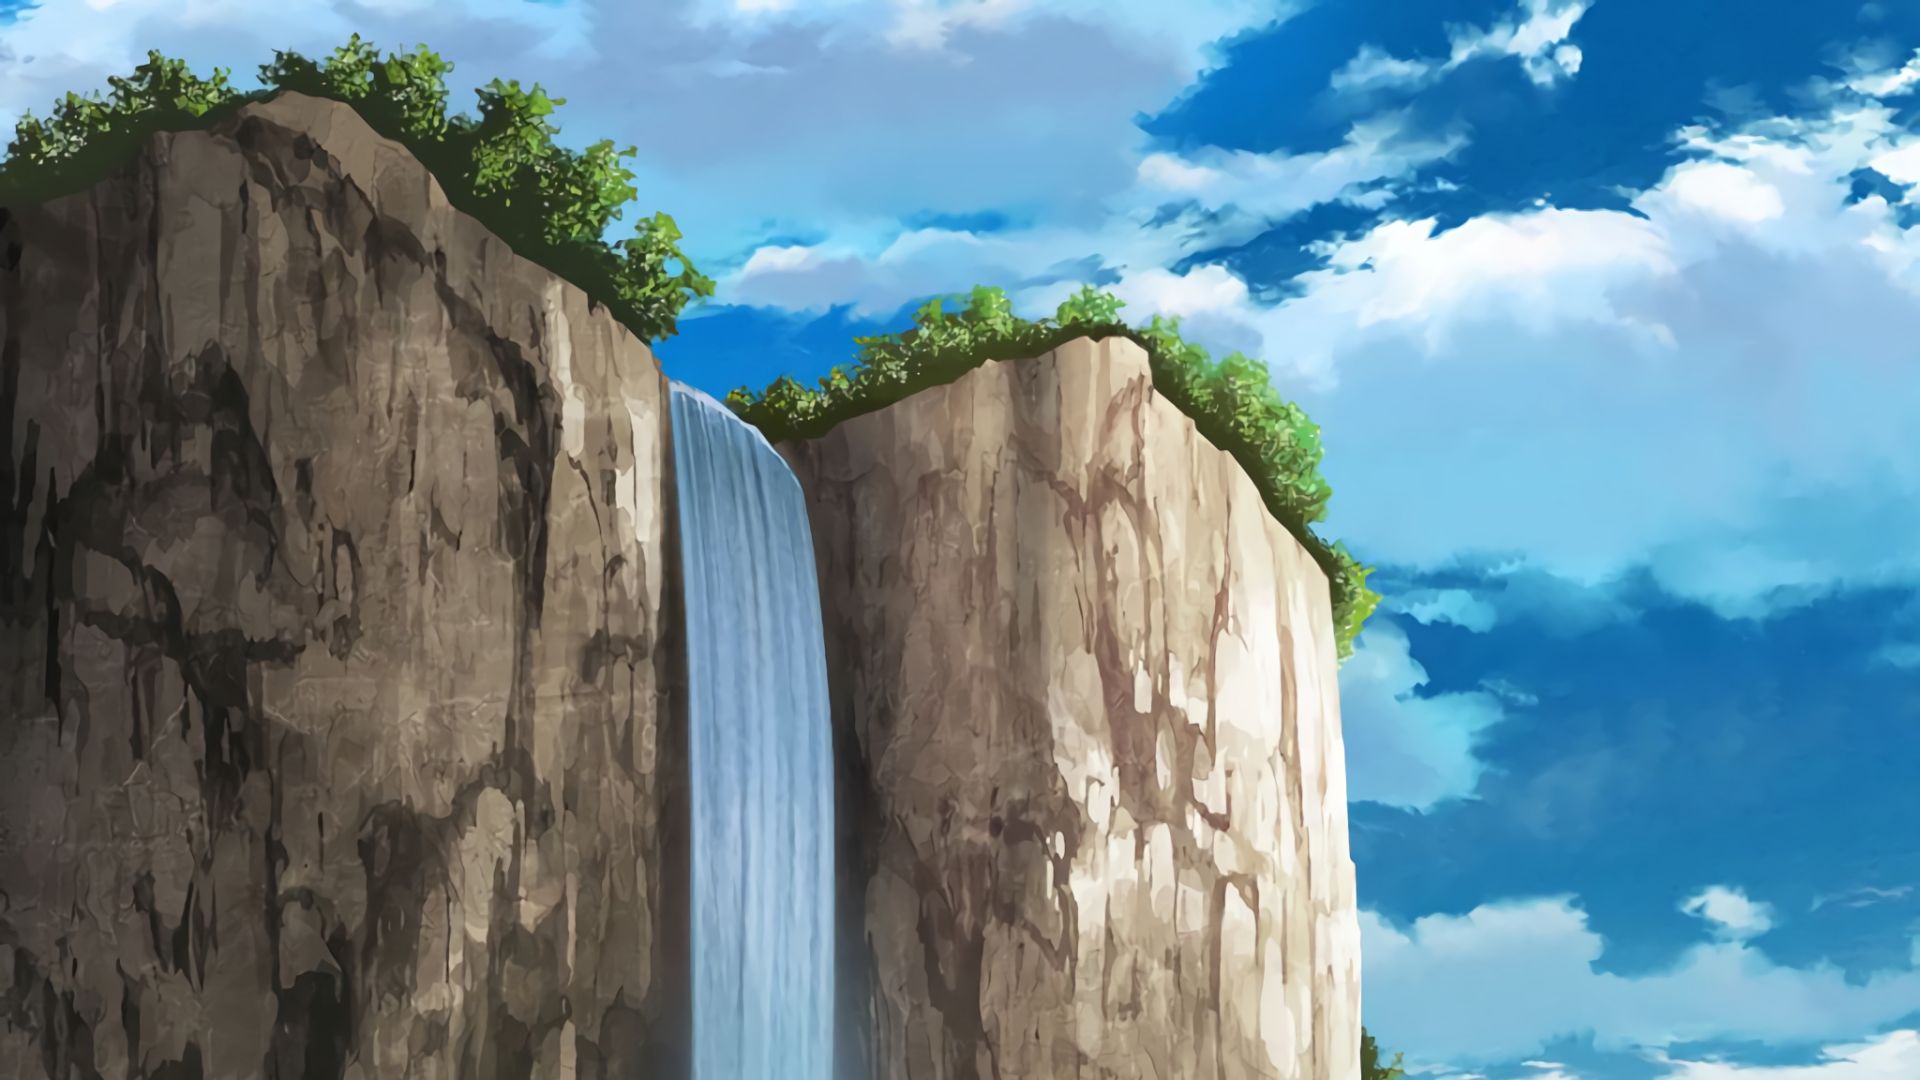 Desktop wallpaper anime water fall hd image picture background jvgc